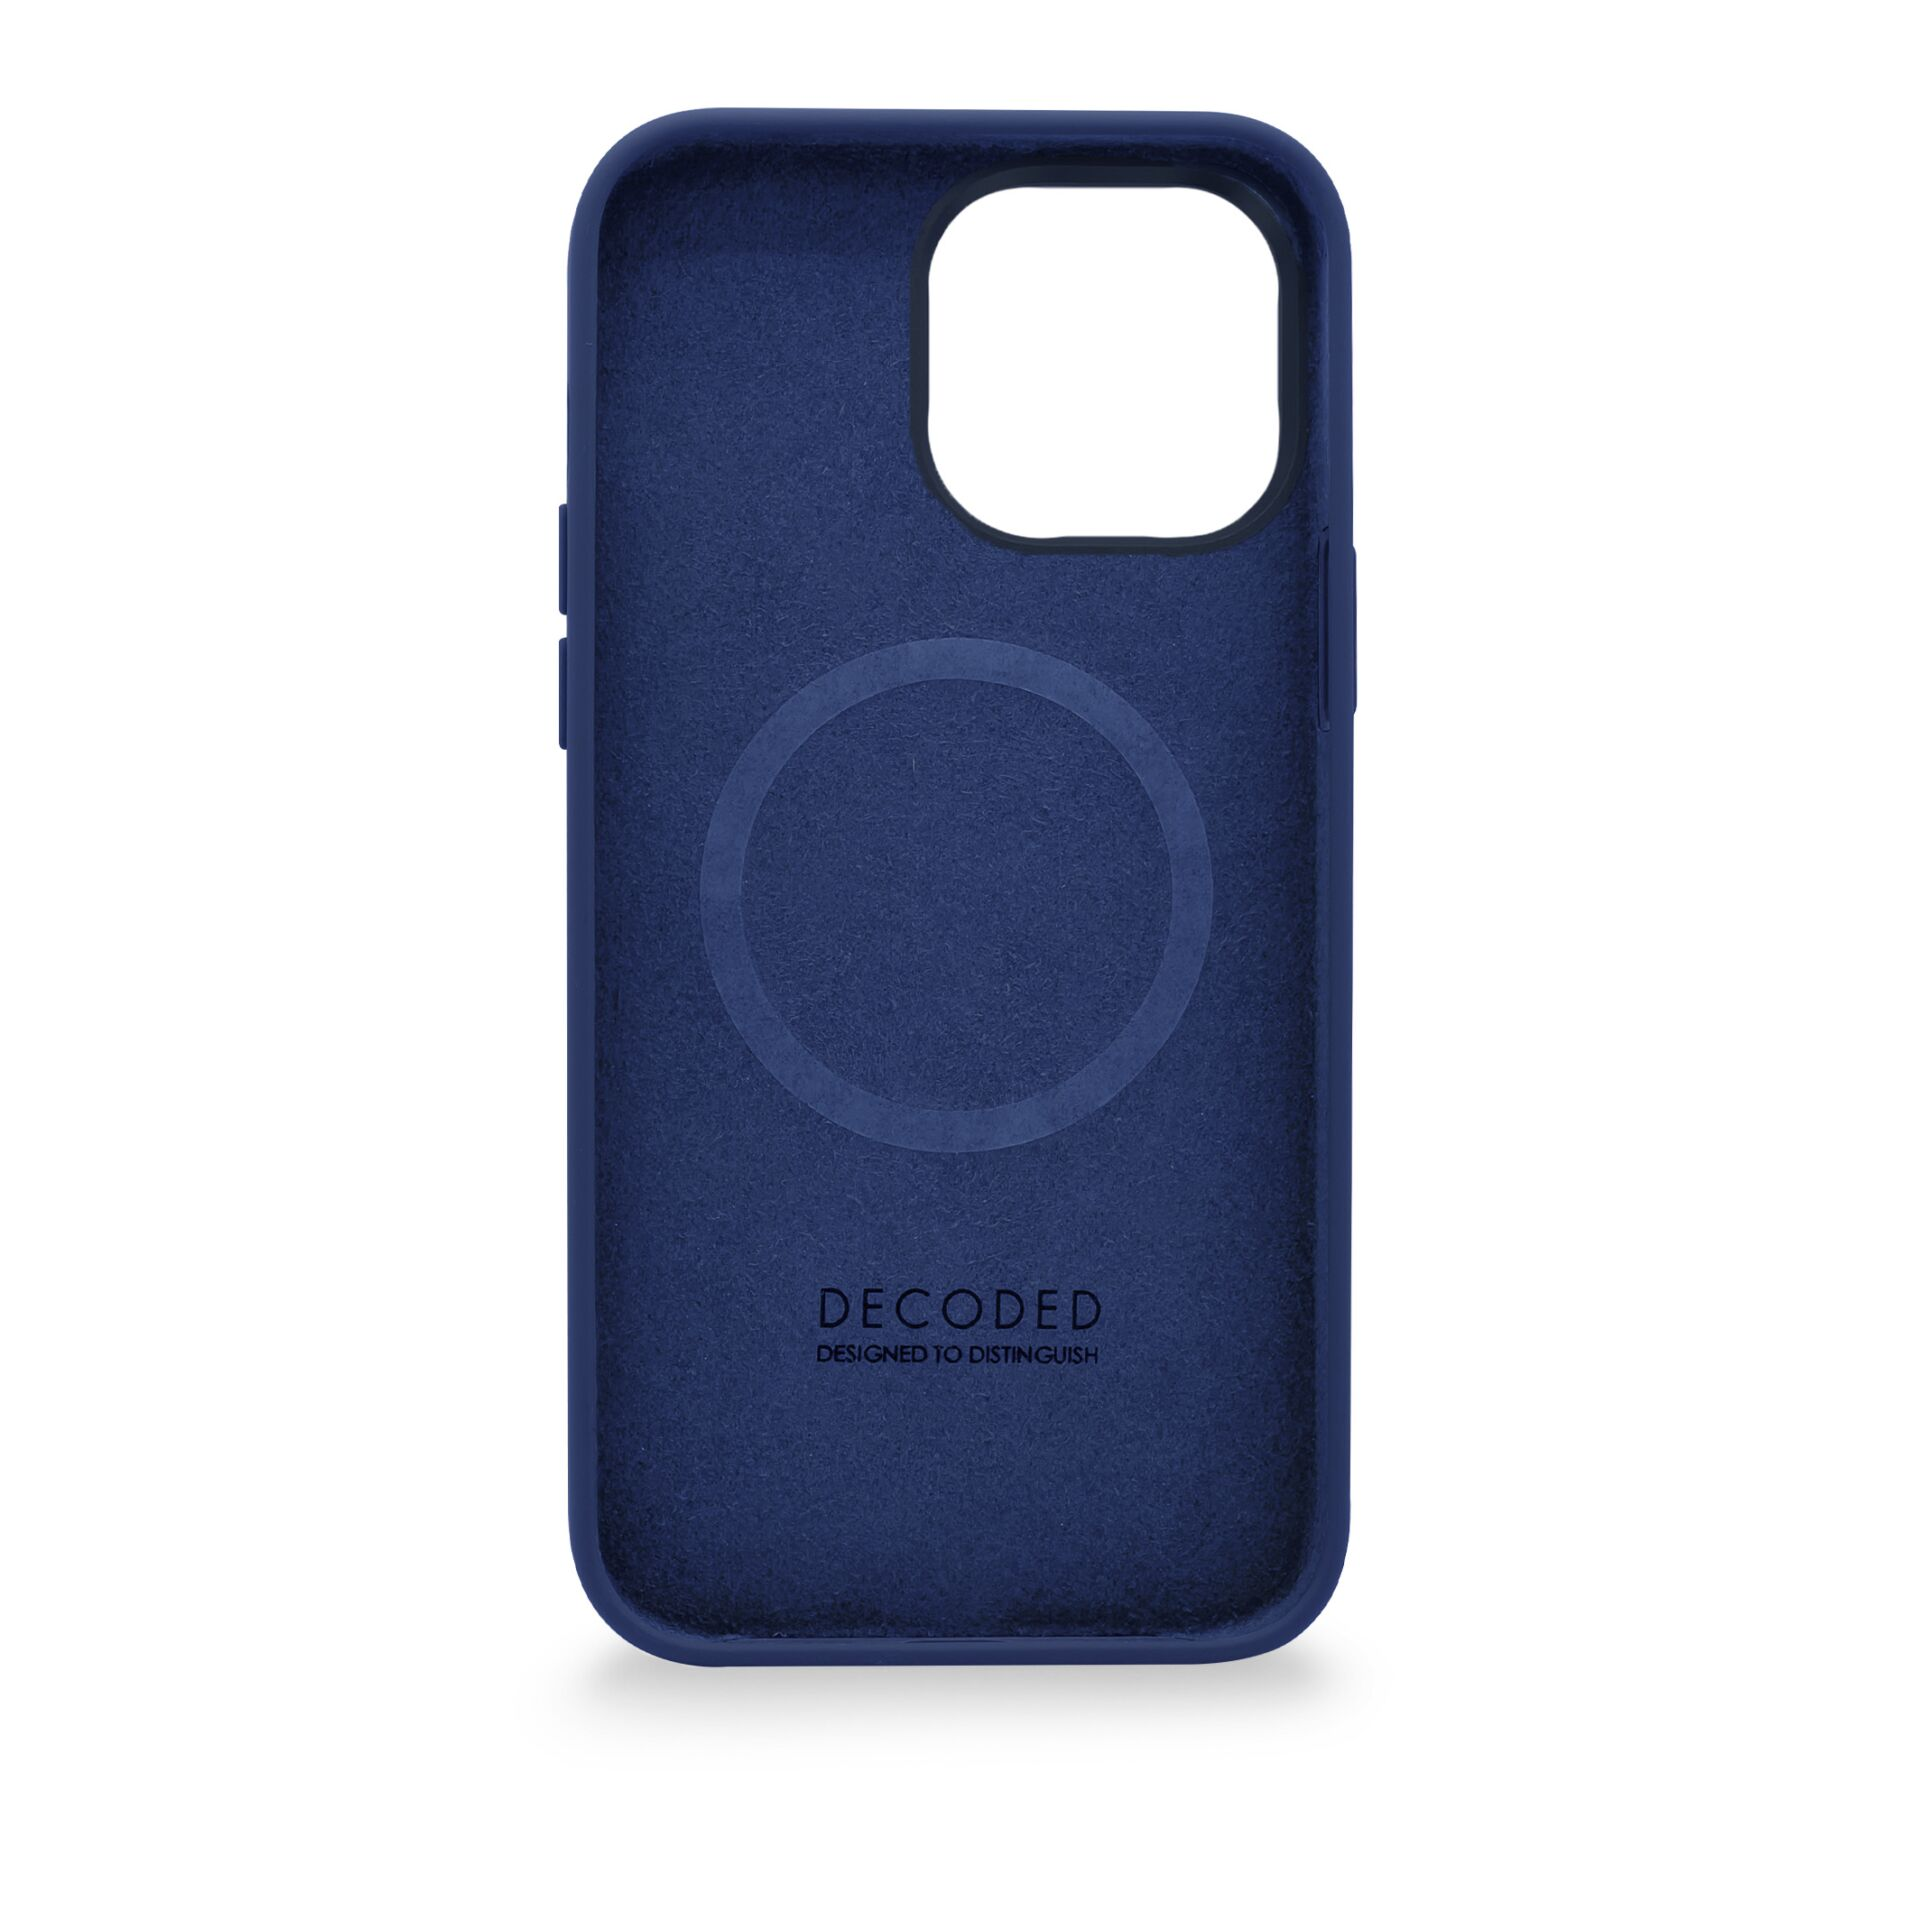 DECODED AntiMicrobial Silicone Backcover Navy Backcover, Peony, Pro, iPhone Apple, Peony Navy 14